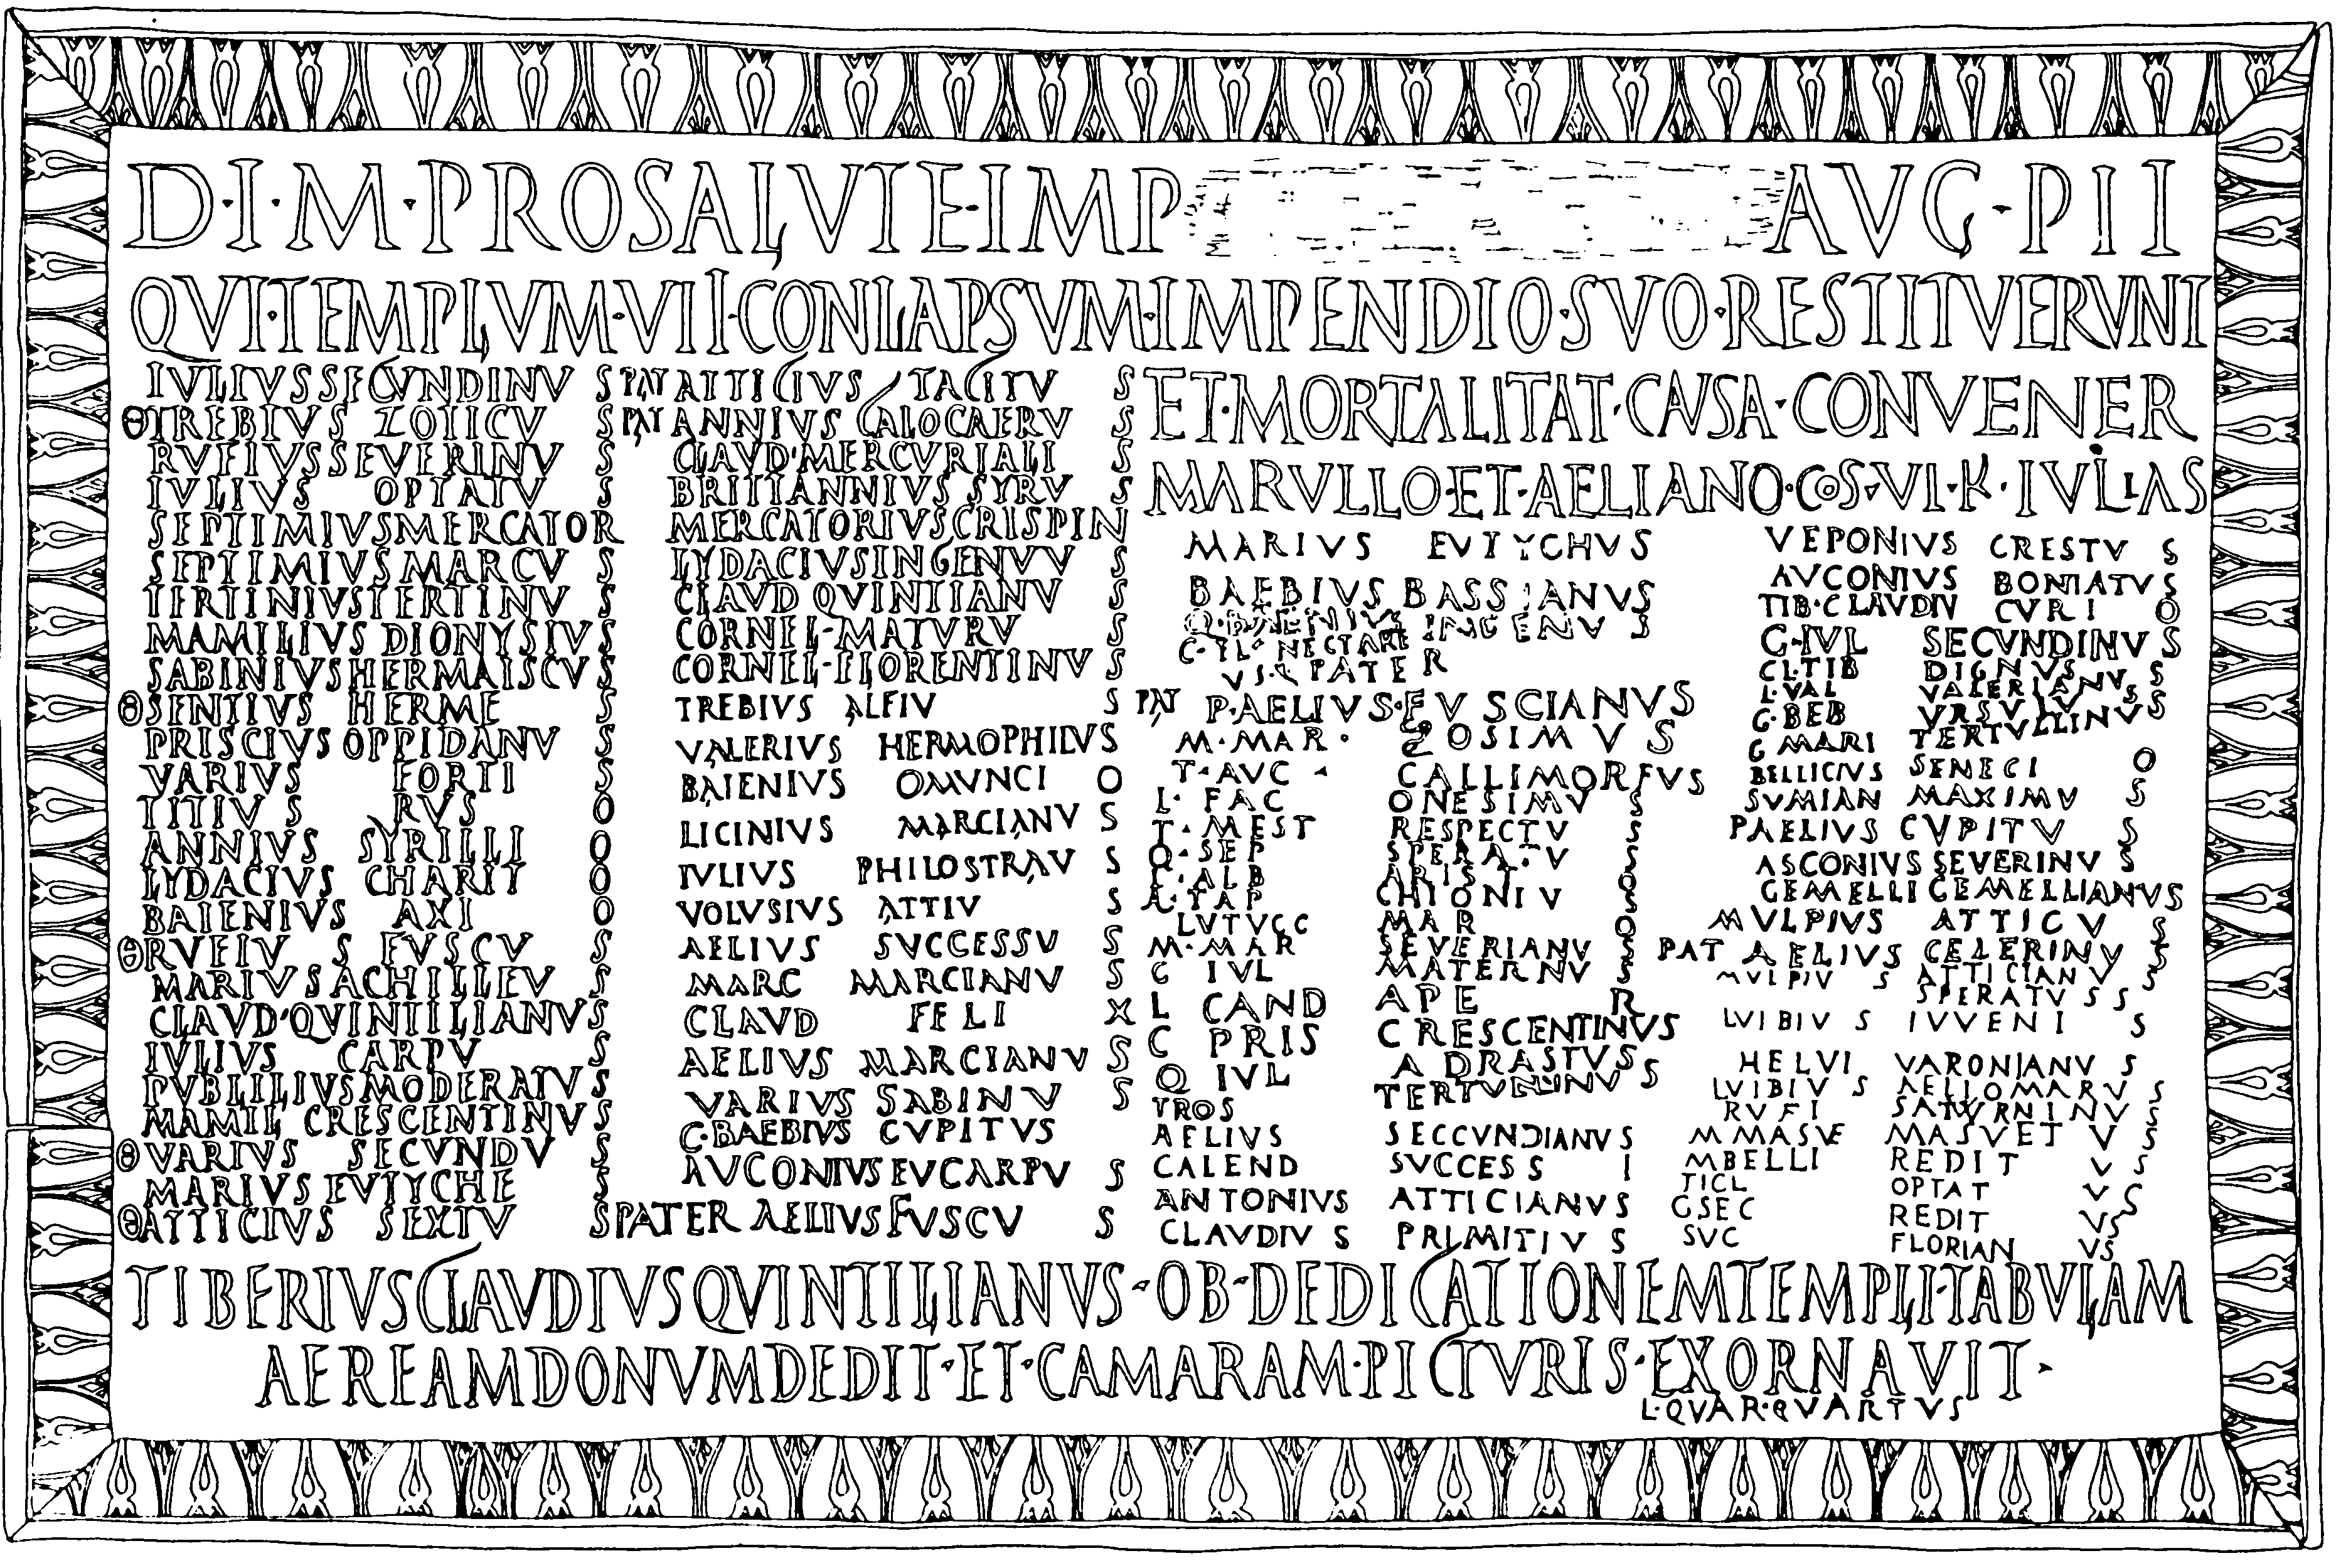 Drawing of the plaque with list of Mithraic fellows from Virunum